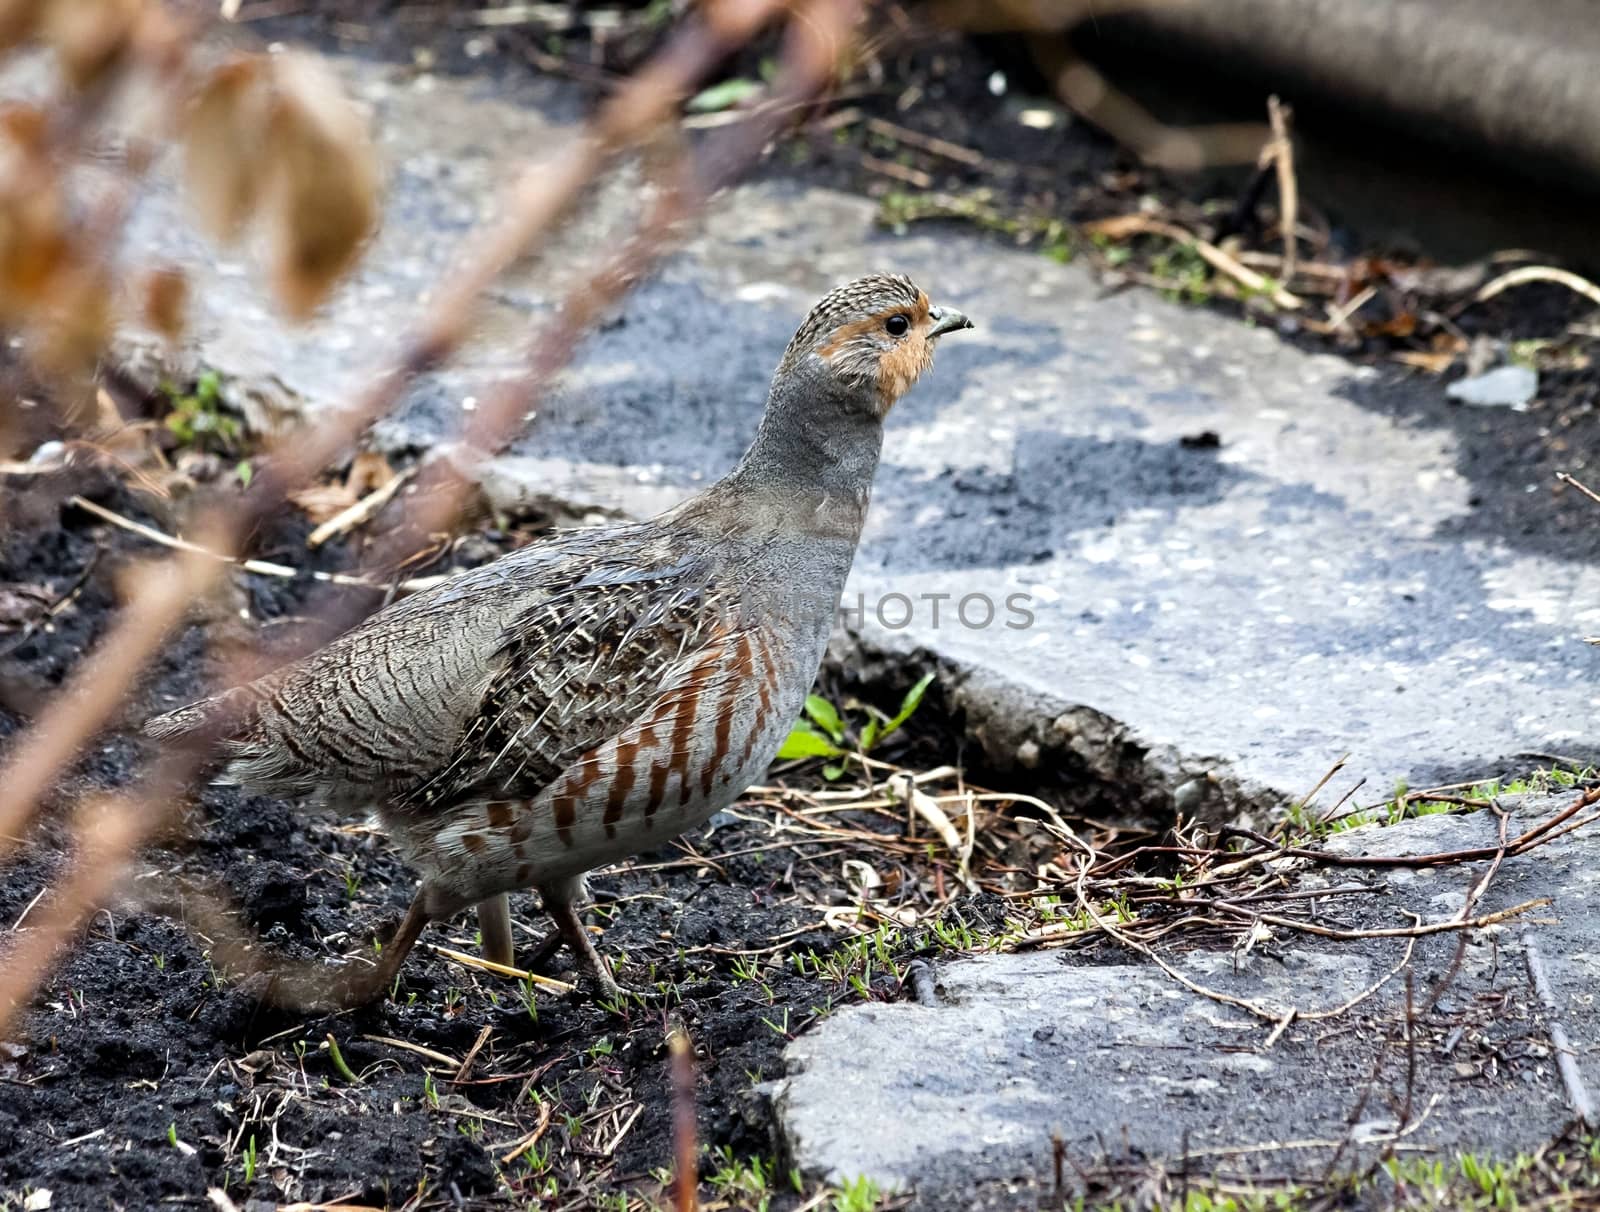 partridge is on the ground, you can see the details of plumage and colors